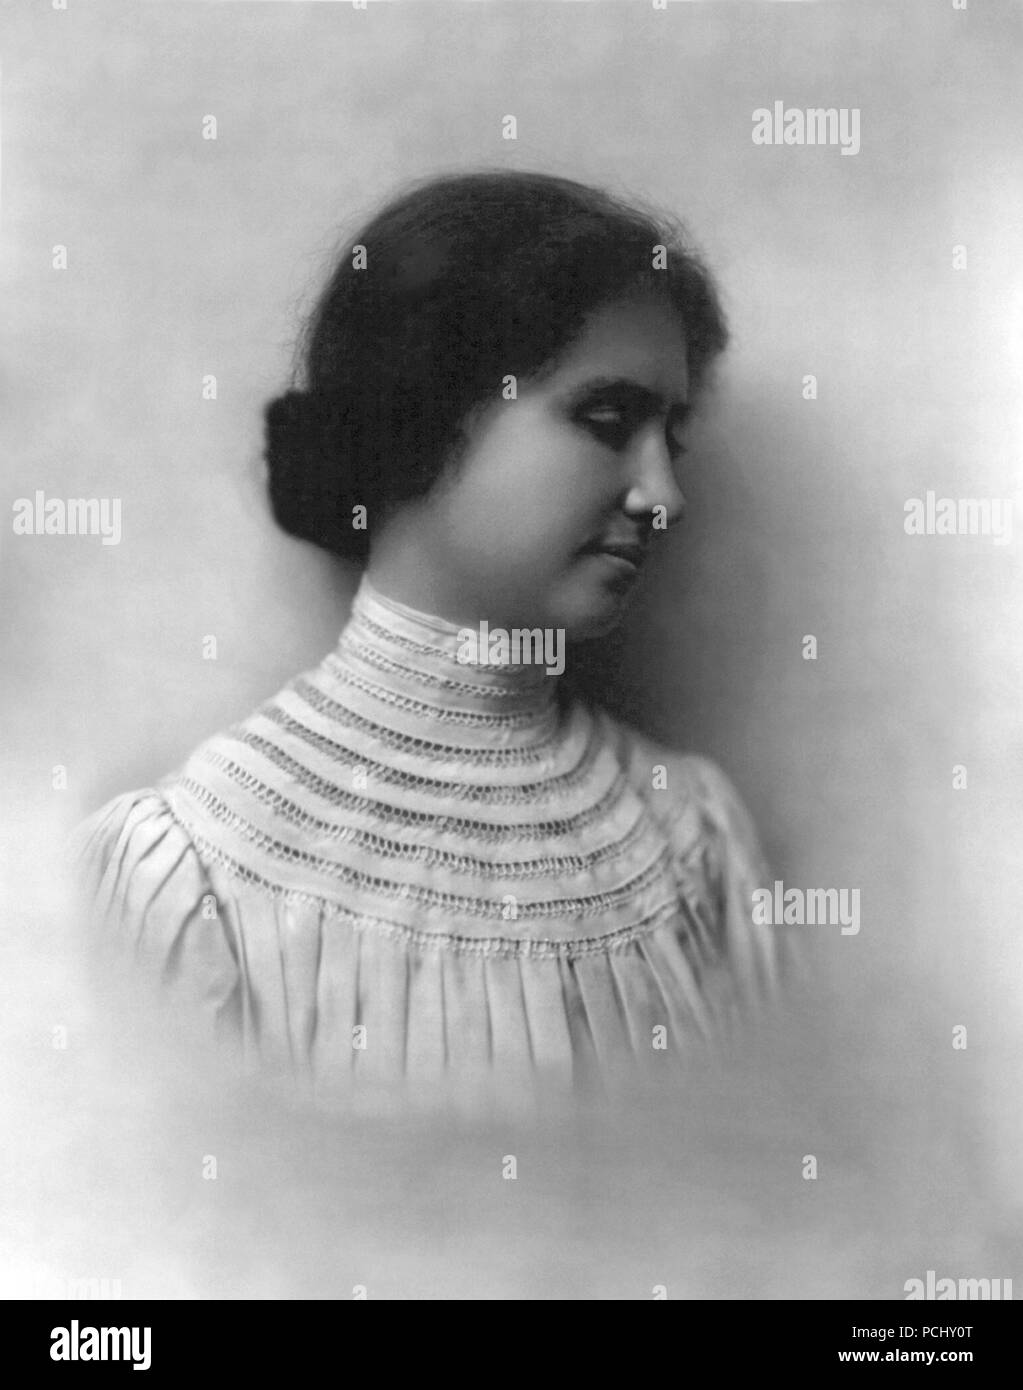 Helen Keller, portrait head and shoulders looking right in 1905 at an unknown location. Helen Keller (June 27, 1880 – June 1, 1968) was an American author, political activist, and lecturer. She was the first deaf-blind person to earn a bachelor of arts degree. Stock Photo